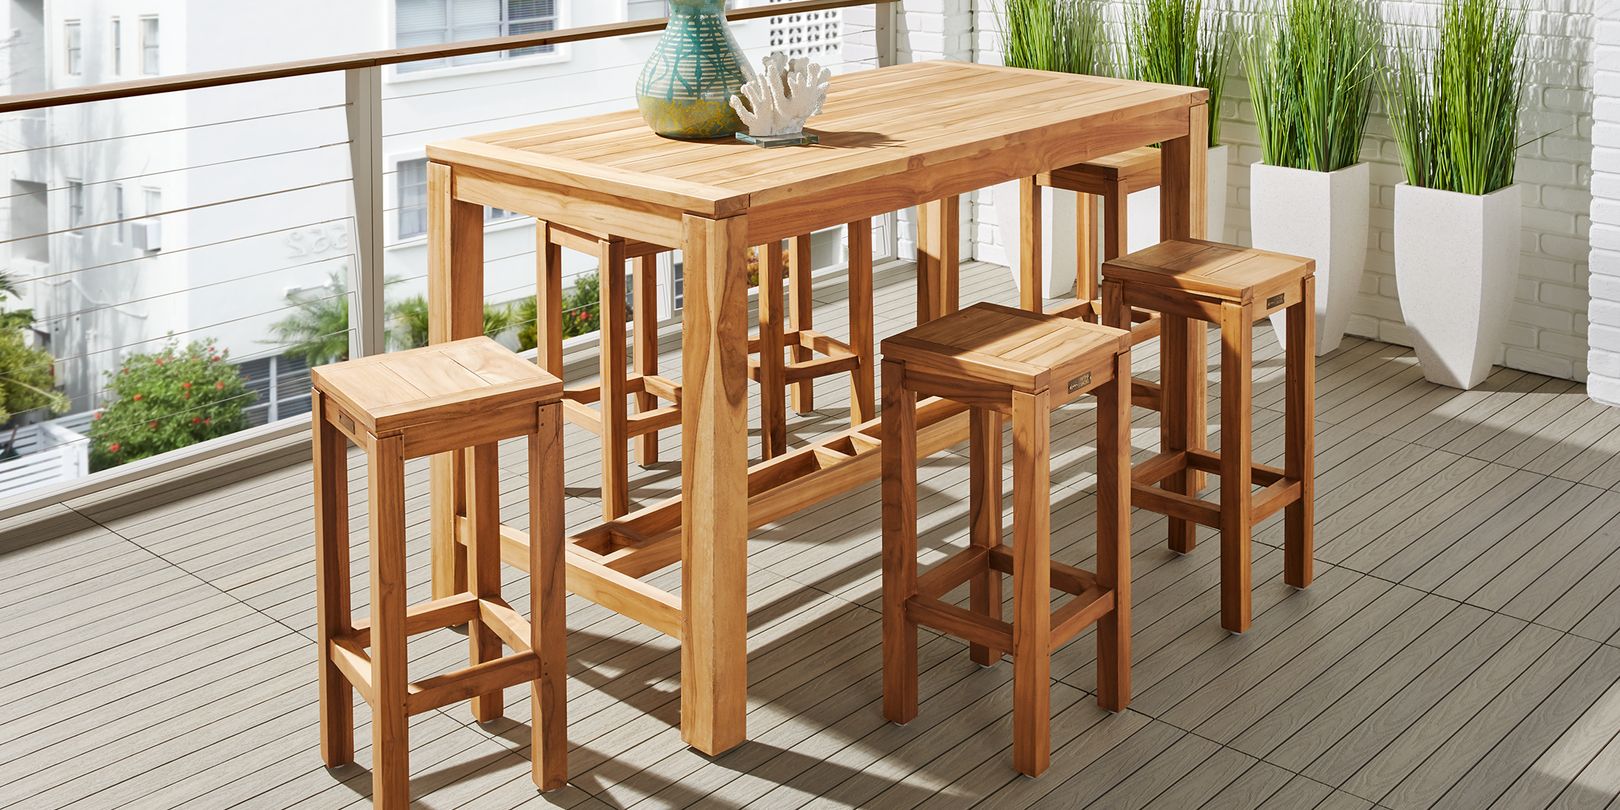 Photo of a teak bar height dining set with stools